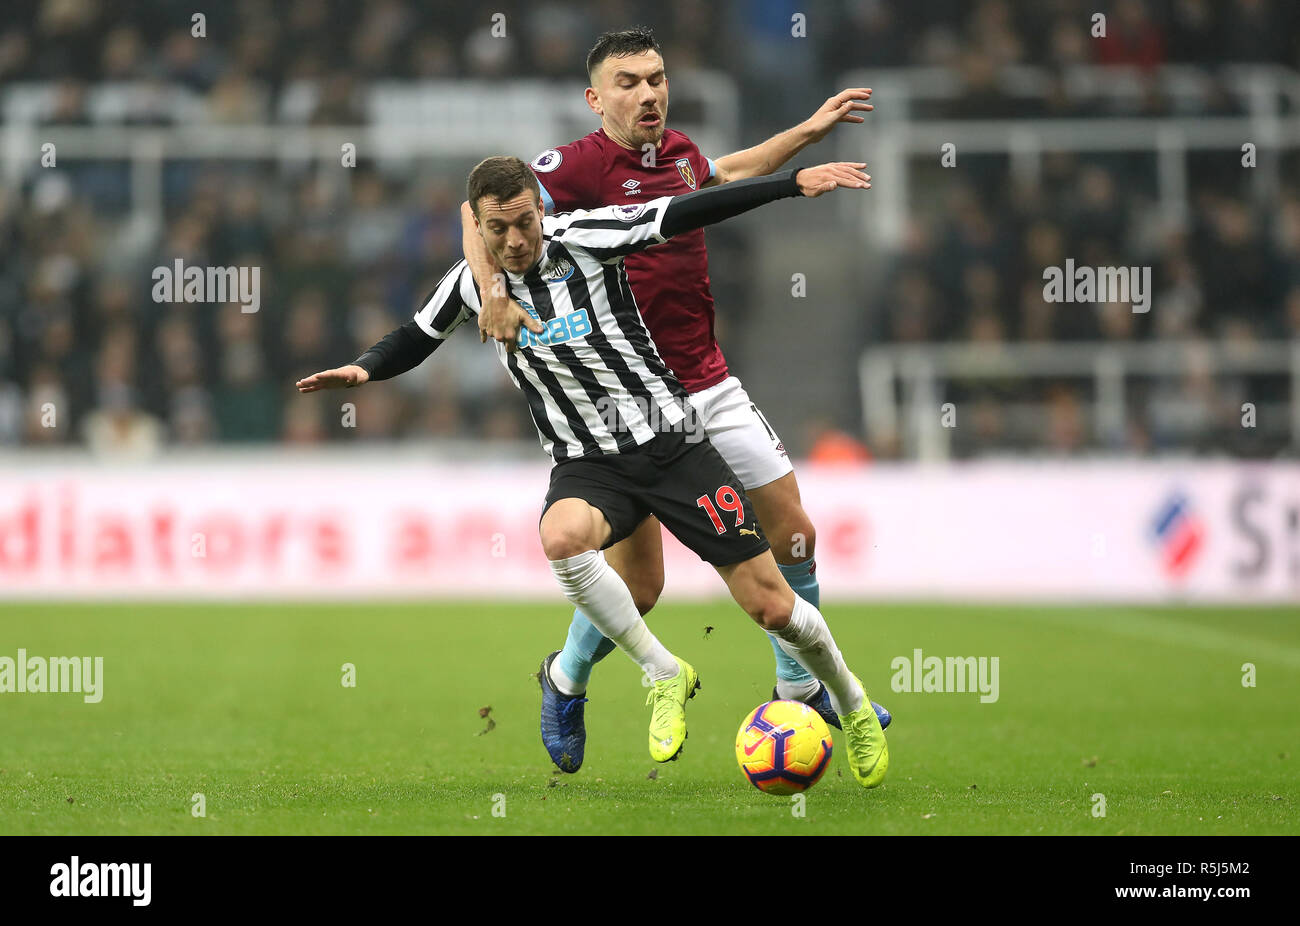 Newcastle United's Javier Manquillo (left) and West Ham United's Robert Snodgrass battle for the ball during the Premier League match at St James' Park, Newcastle. Stock Photo